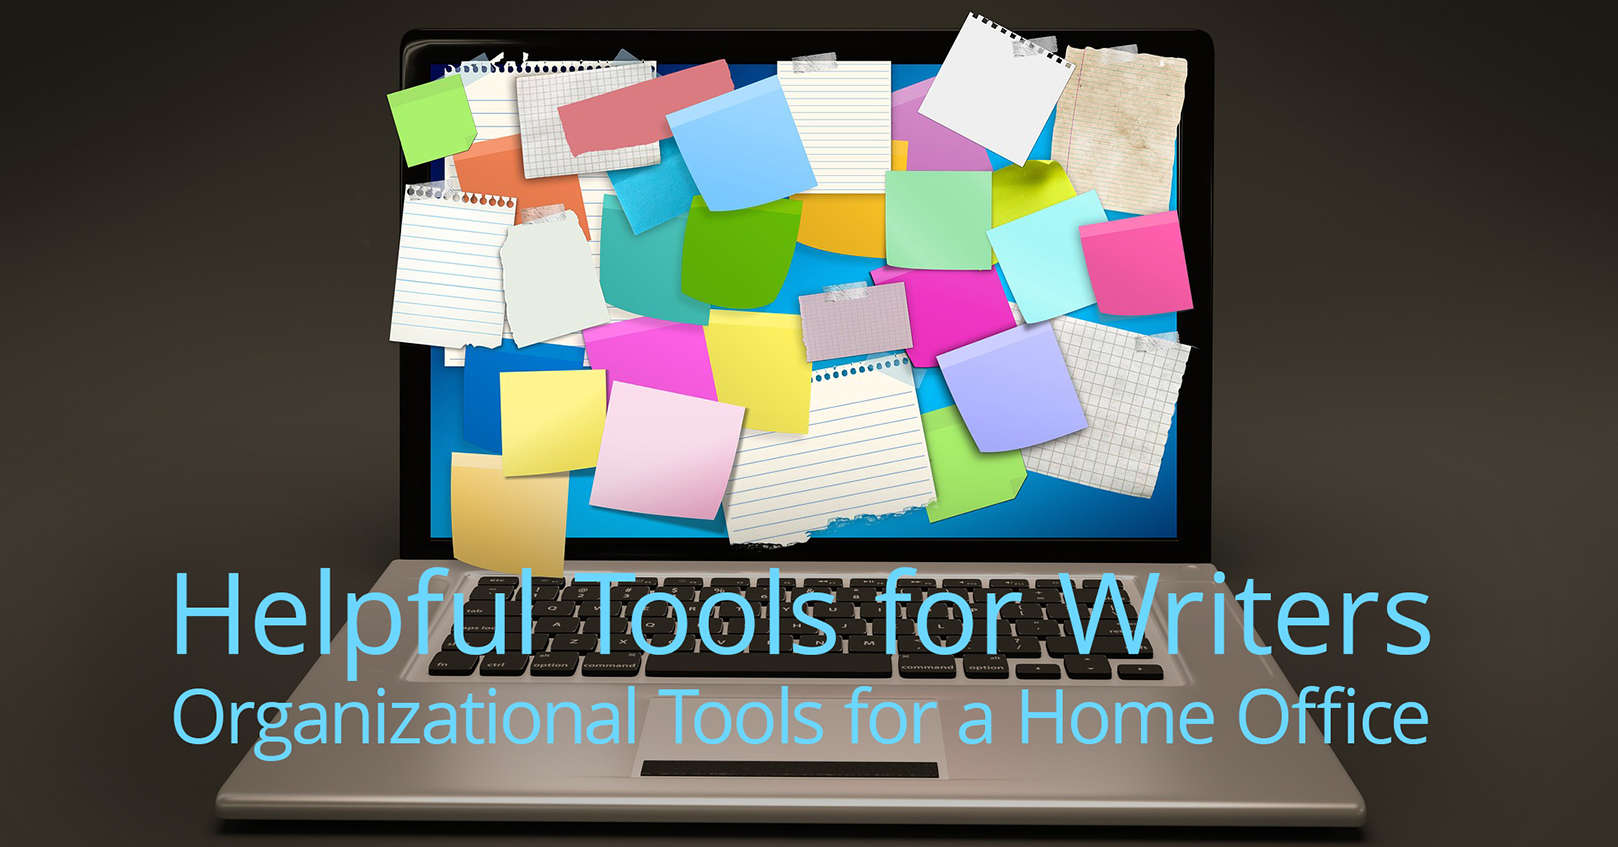 Organizational Tools for a Home Office